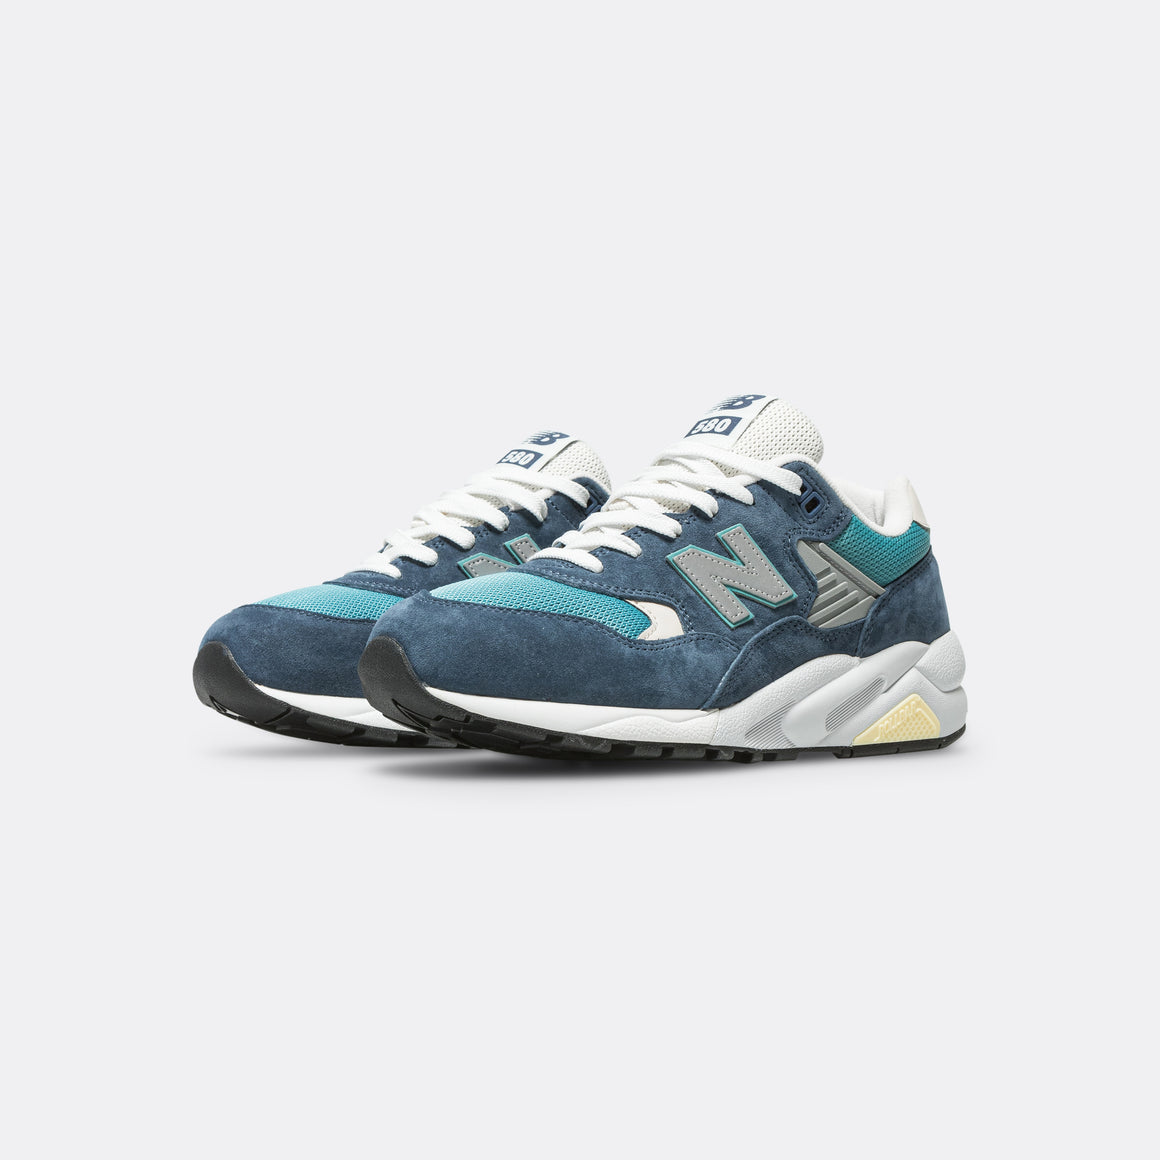 New Balance - MT580CA2 - UP THERE